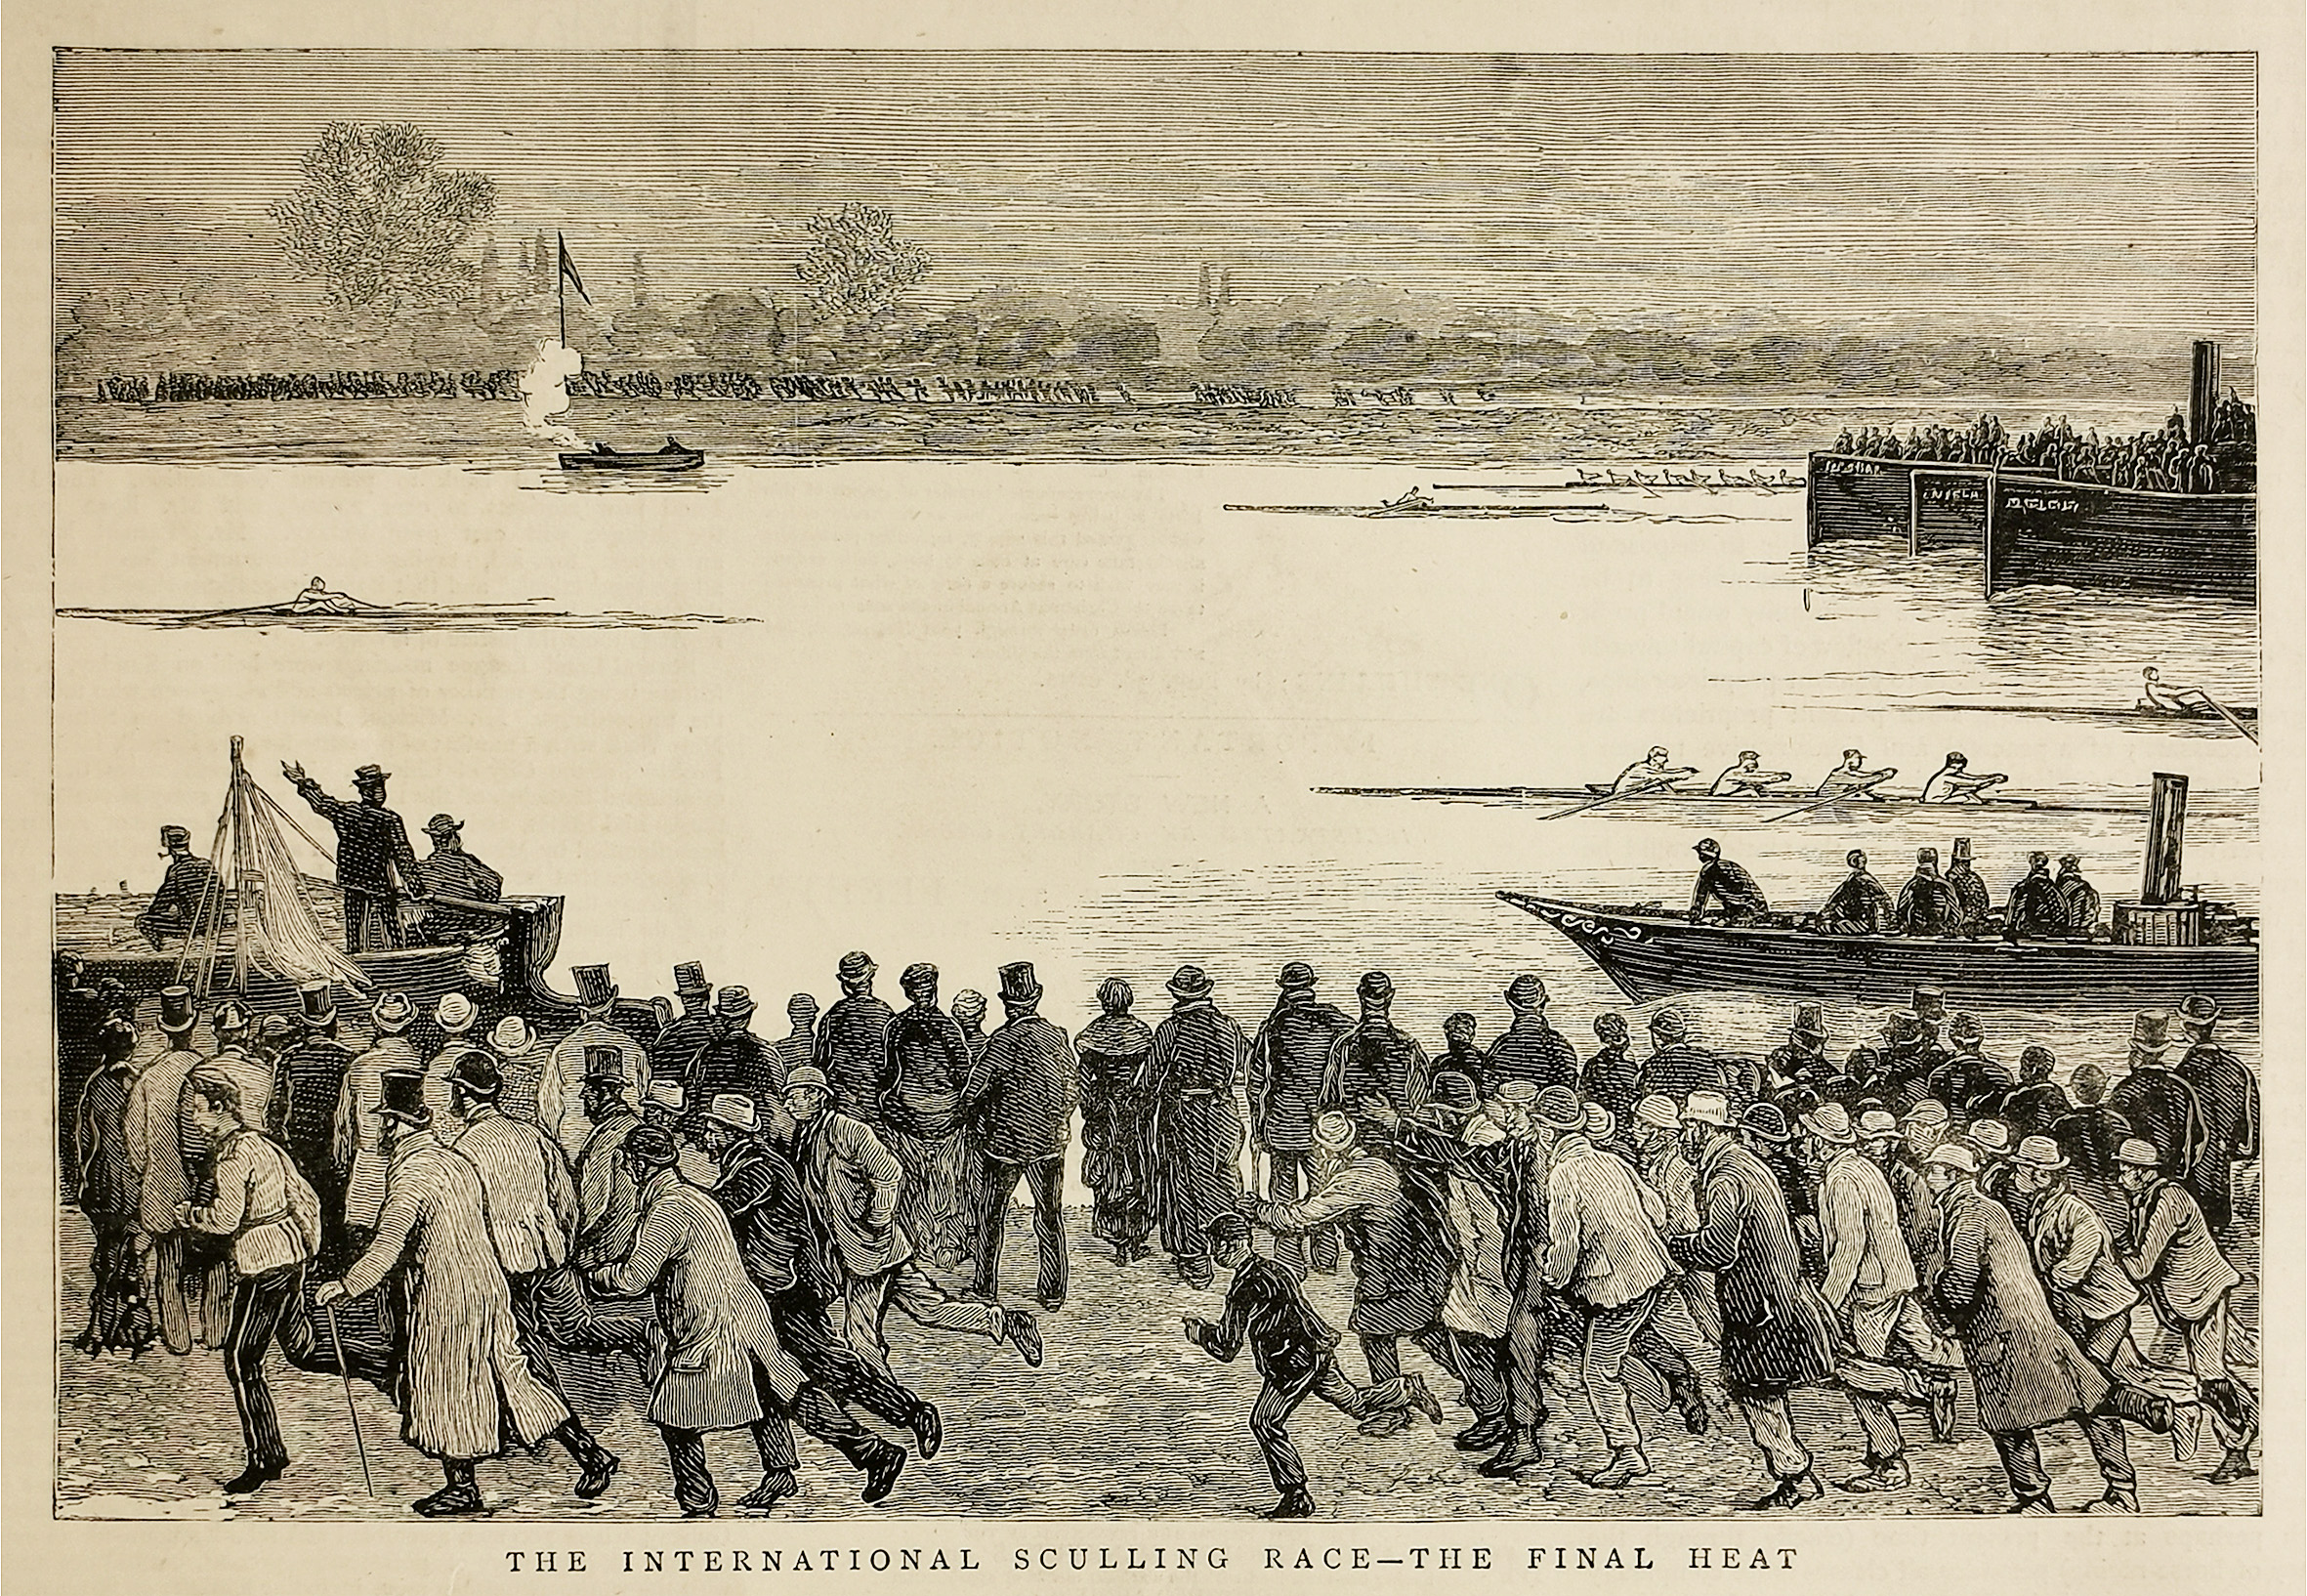 The International Sculling Race - The Final Heat - Antique Print from 1880